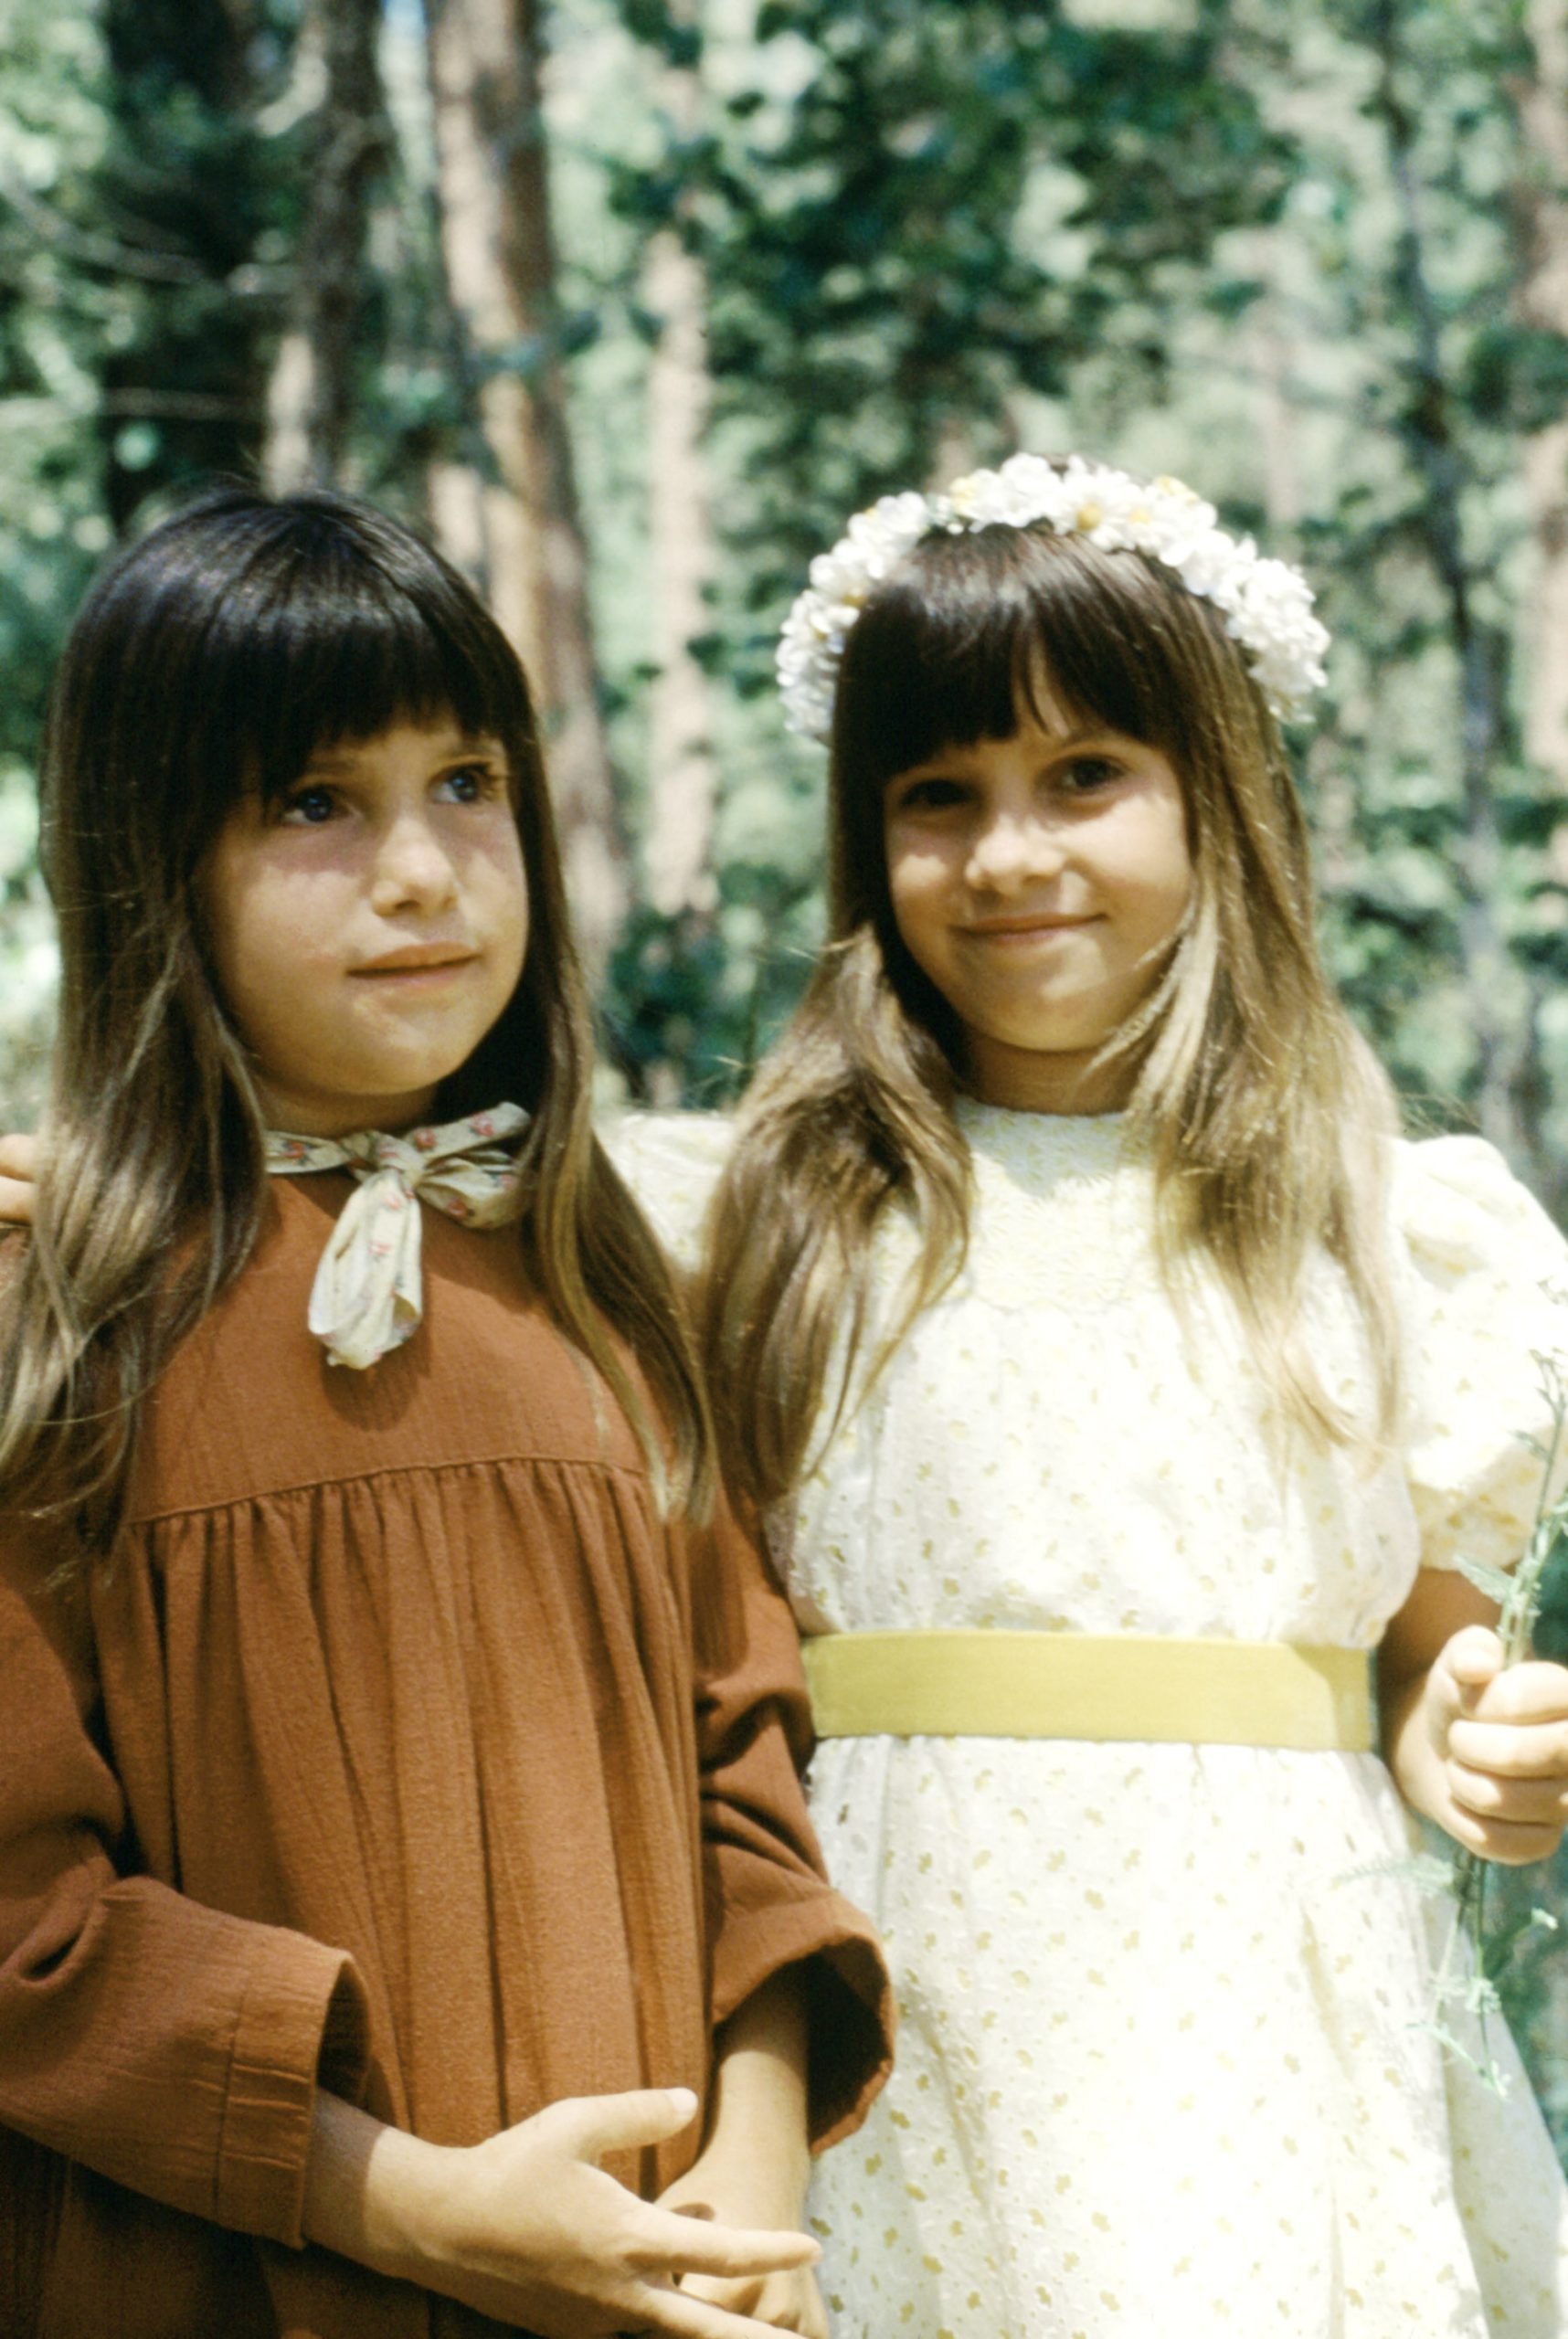 Sometimes, viewers could see subtle differences based on who played Carrie Ingalls